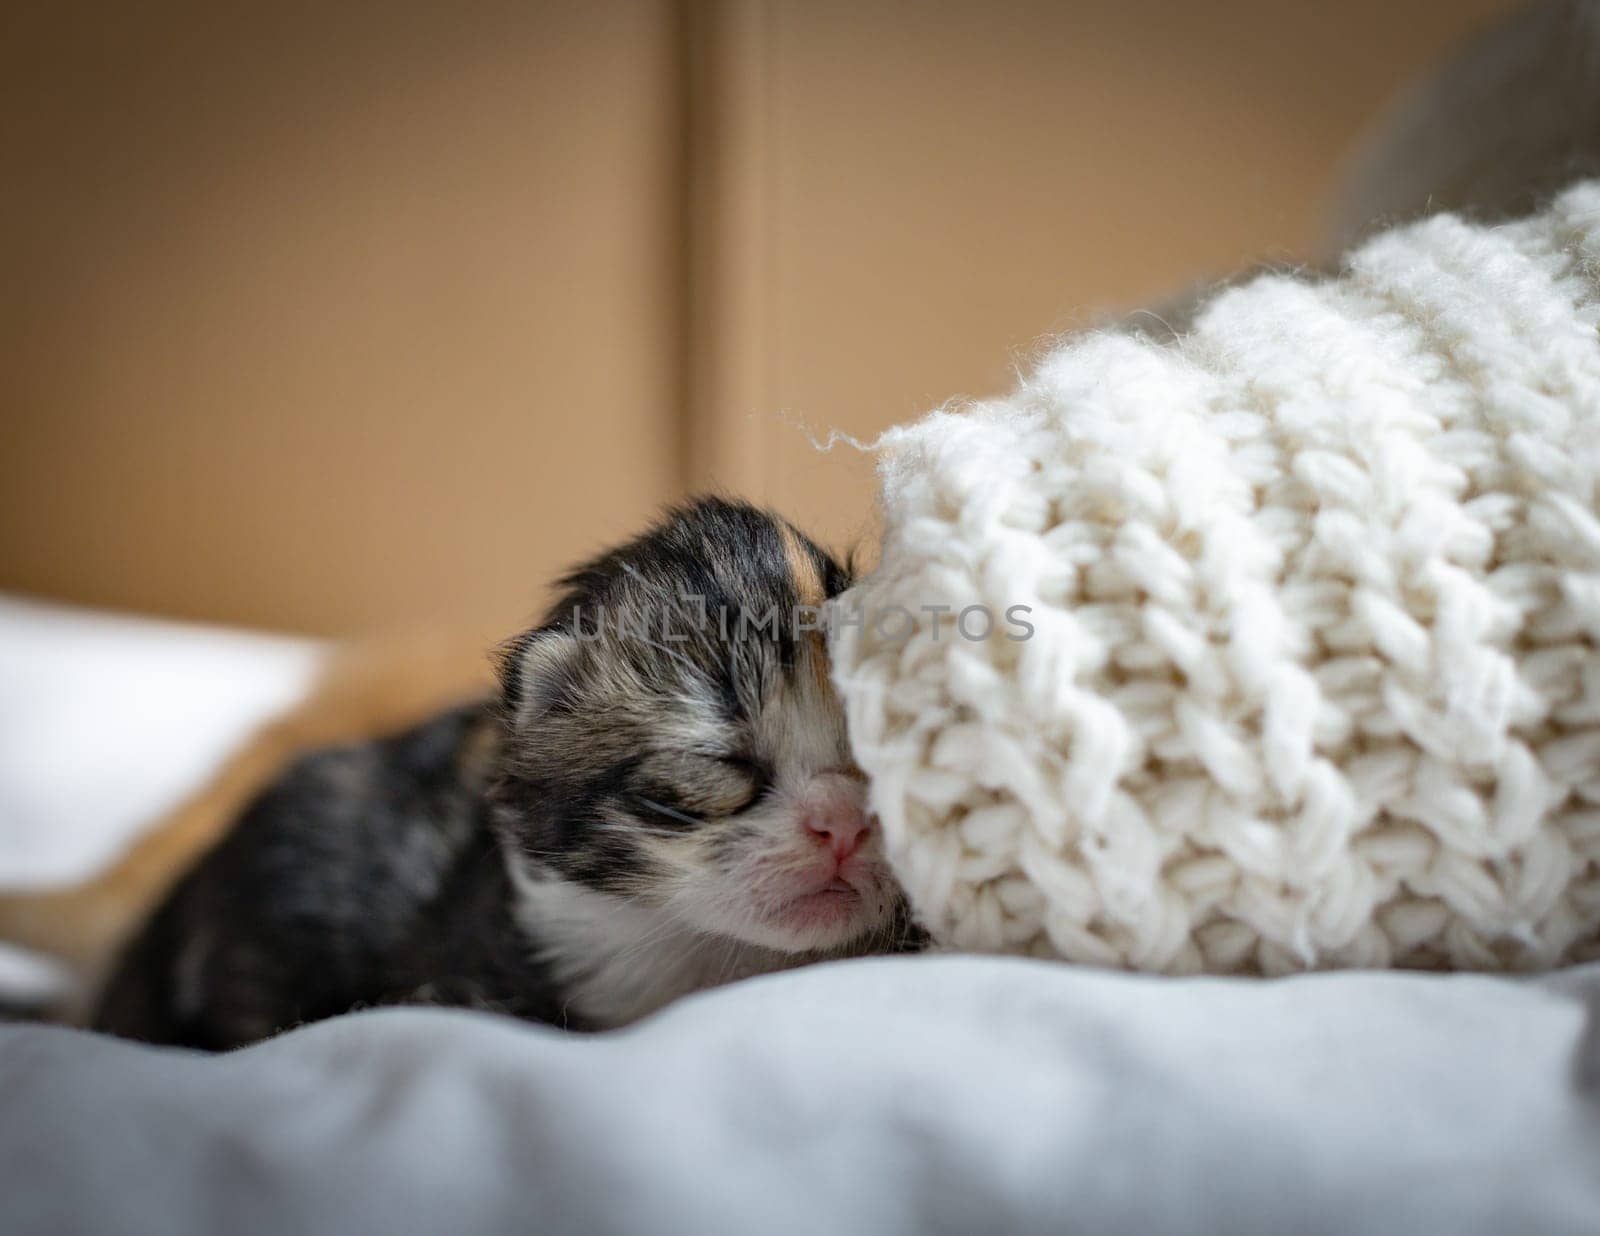 One red-haired with white spots newborn kittens sleep near a knitted sweater on the bed, side view, close-up. Pet lifestyle concept.